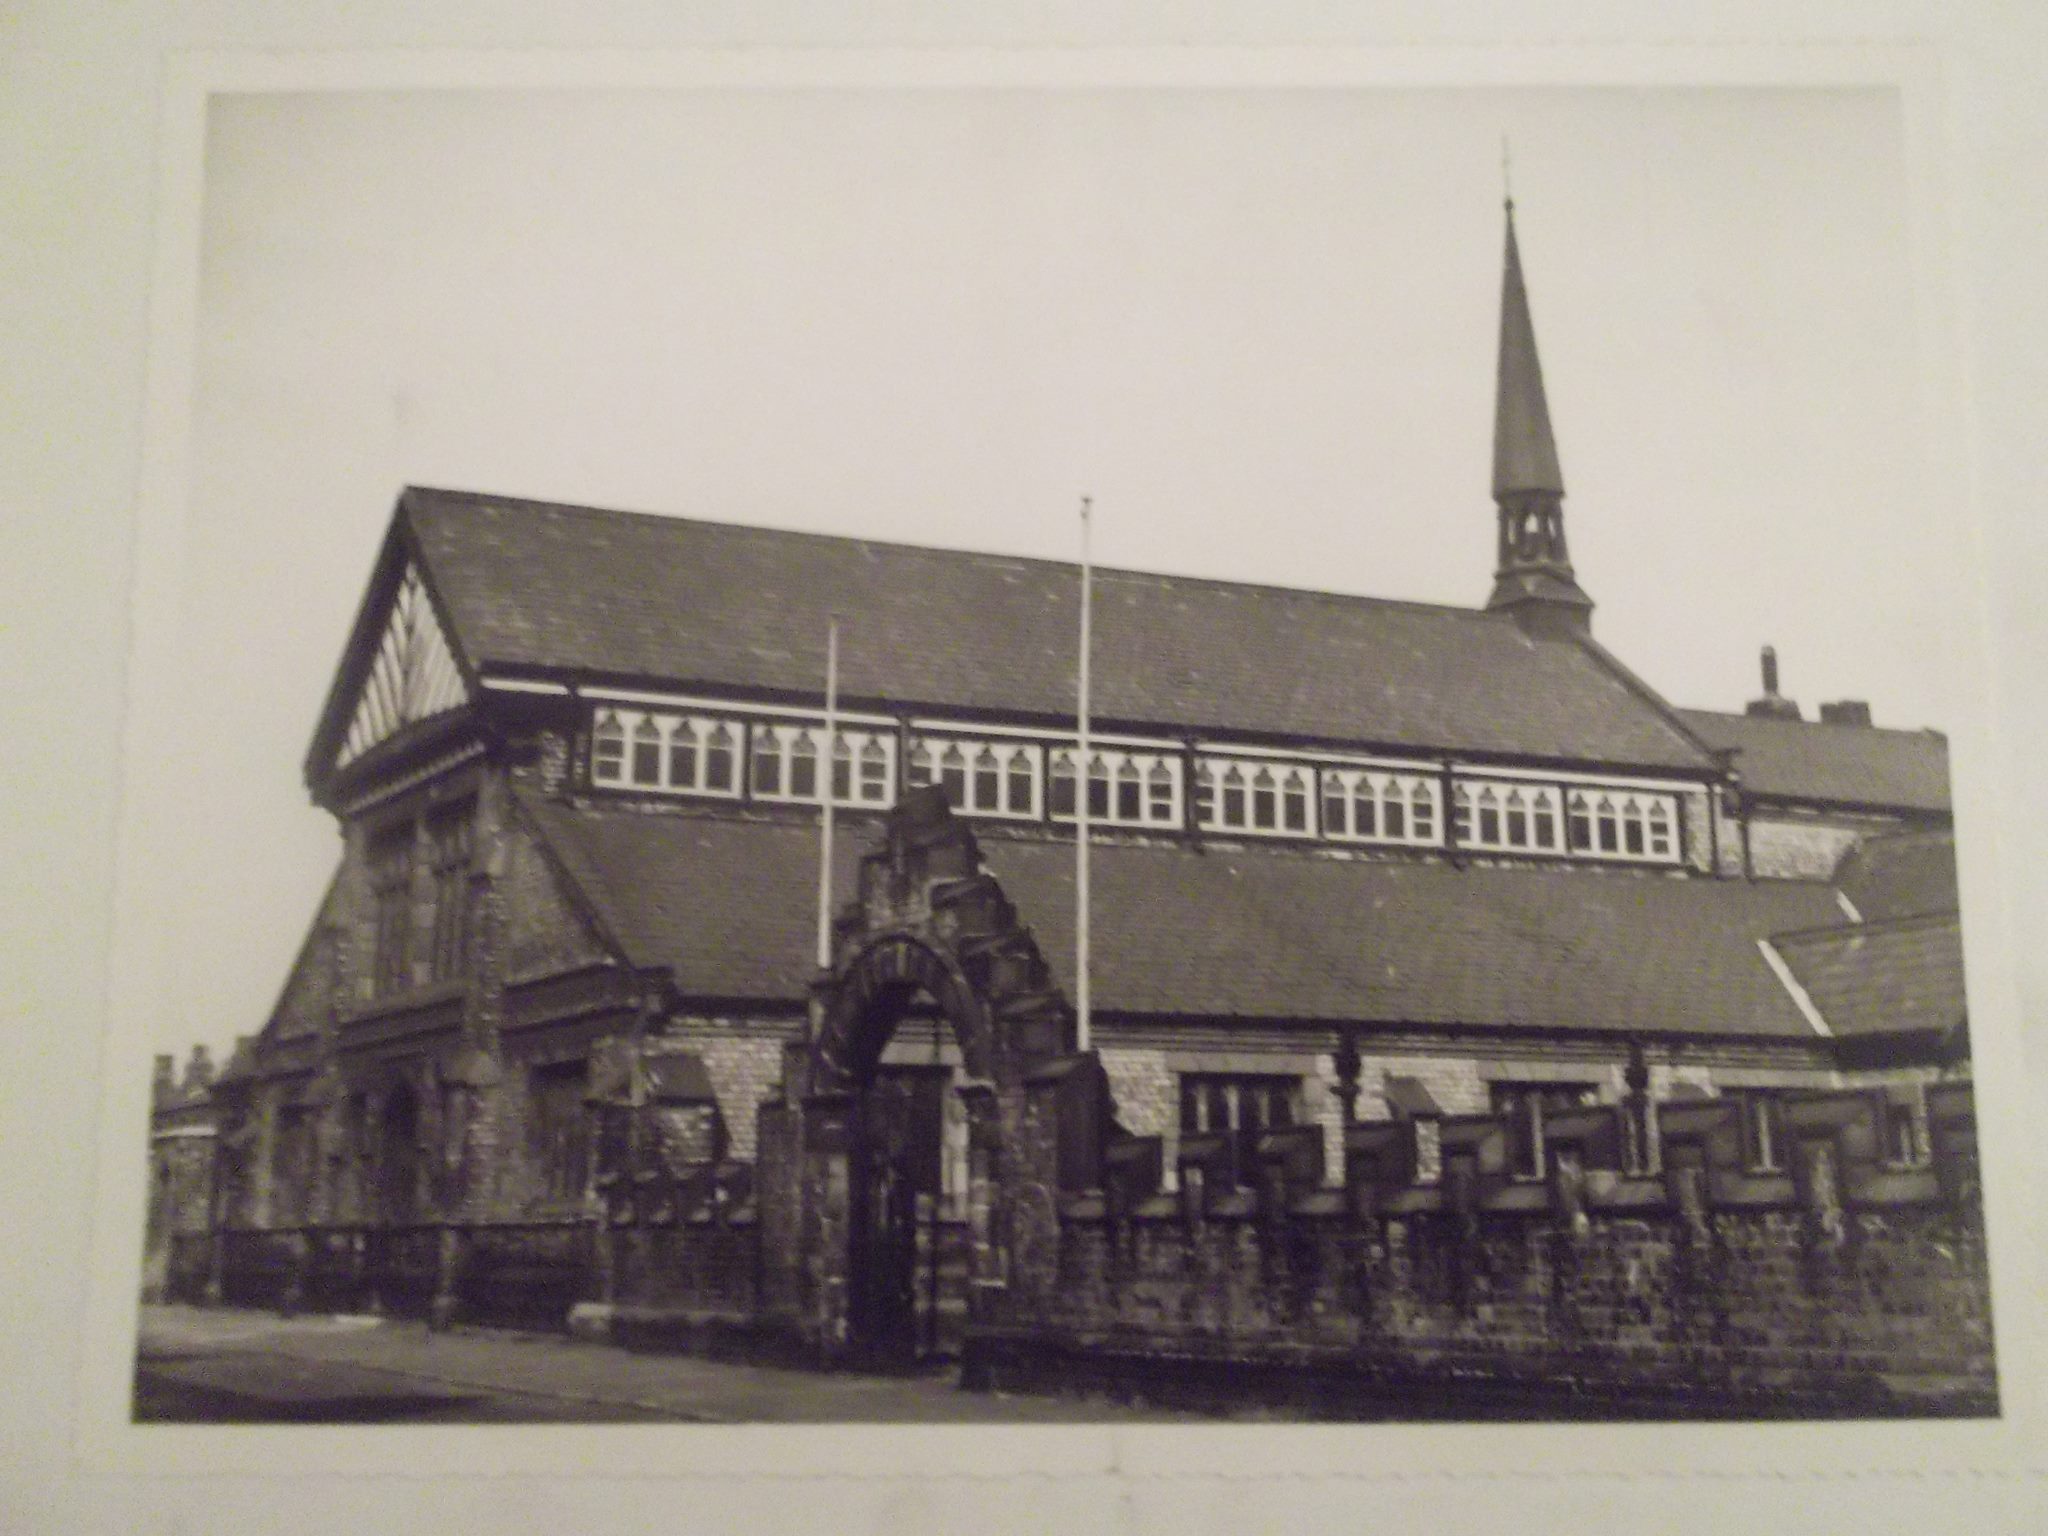 The Church of St Cyprian, Ordsall, 30-7-55. Photograph courtesy of Ken Williamson